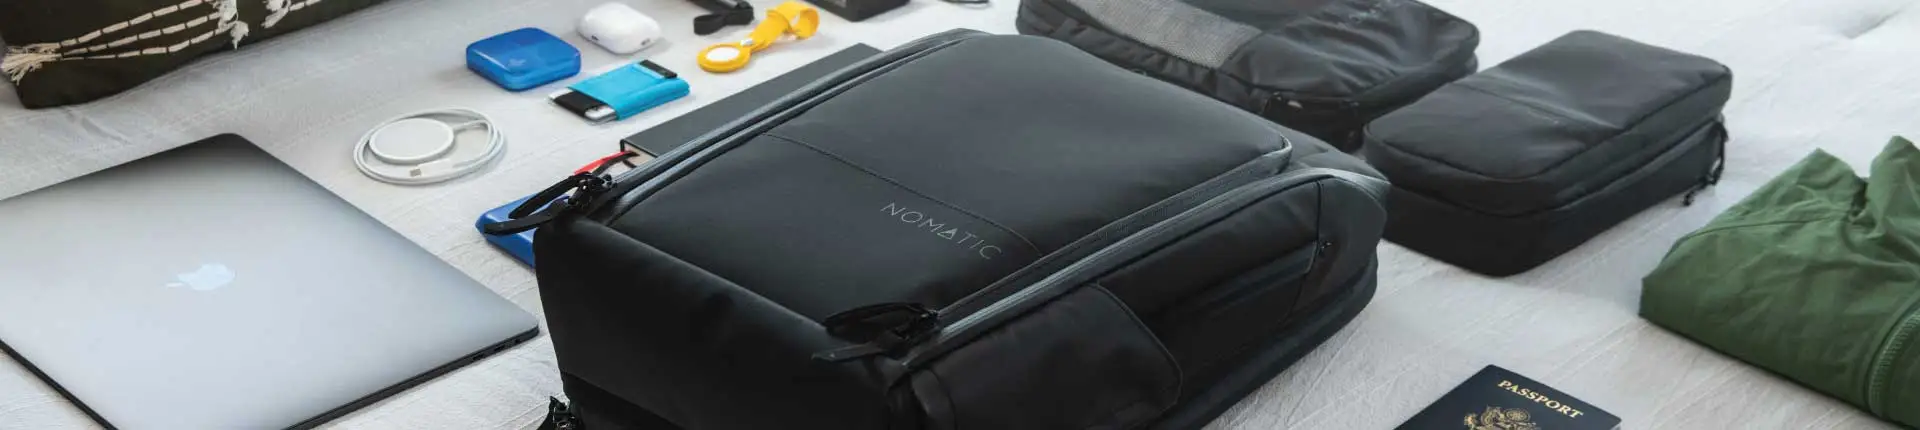 nomatic travel bags